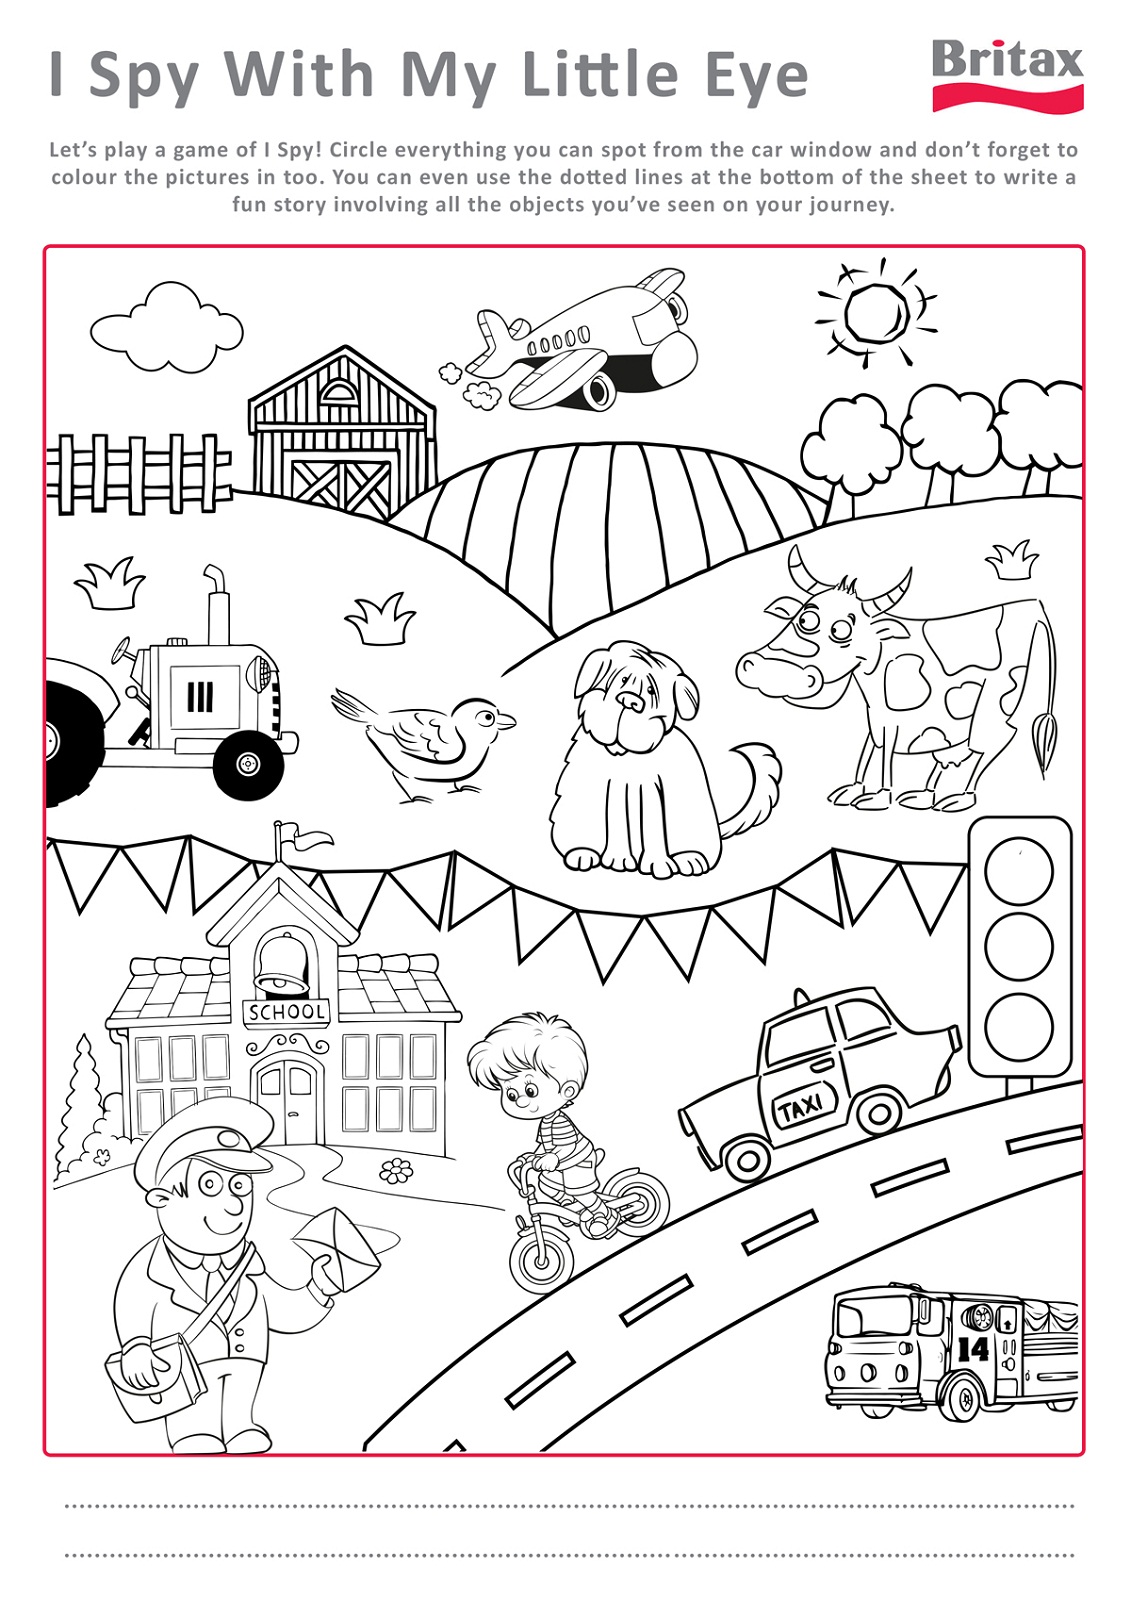 Download Printable Activity Sheets for Kids | Activity Shelter